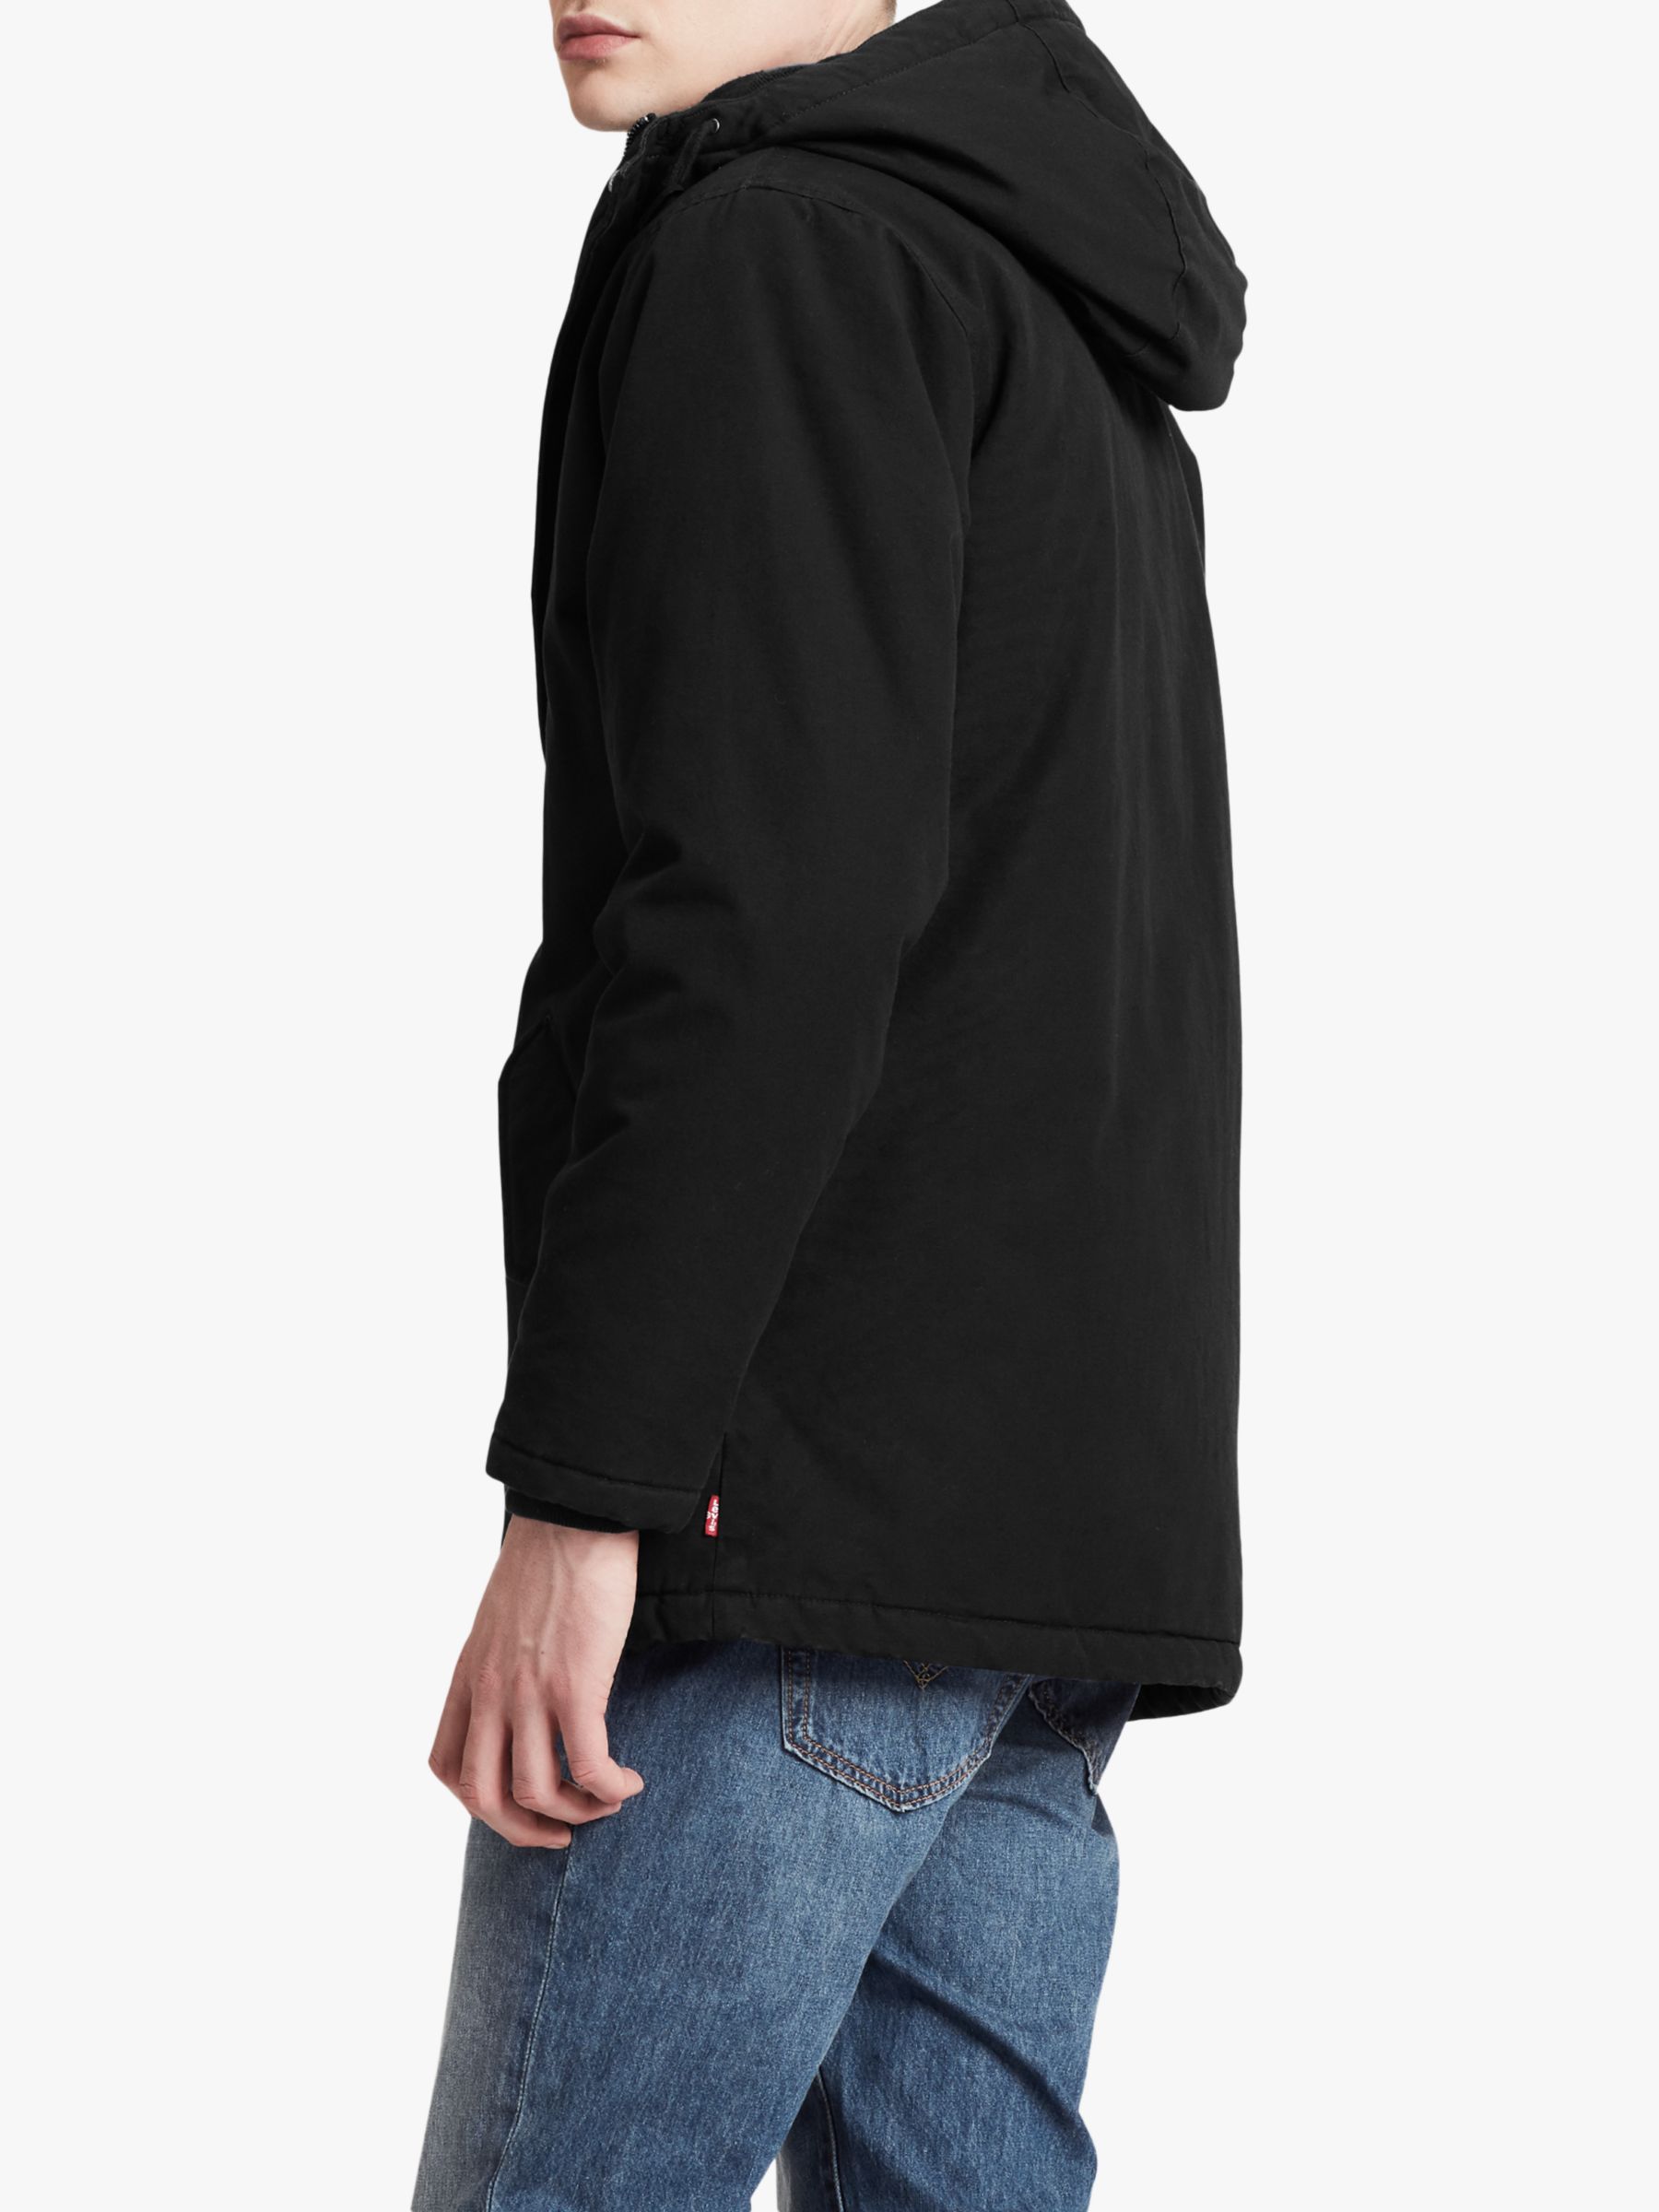 levis thermore padded parka jacket